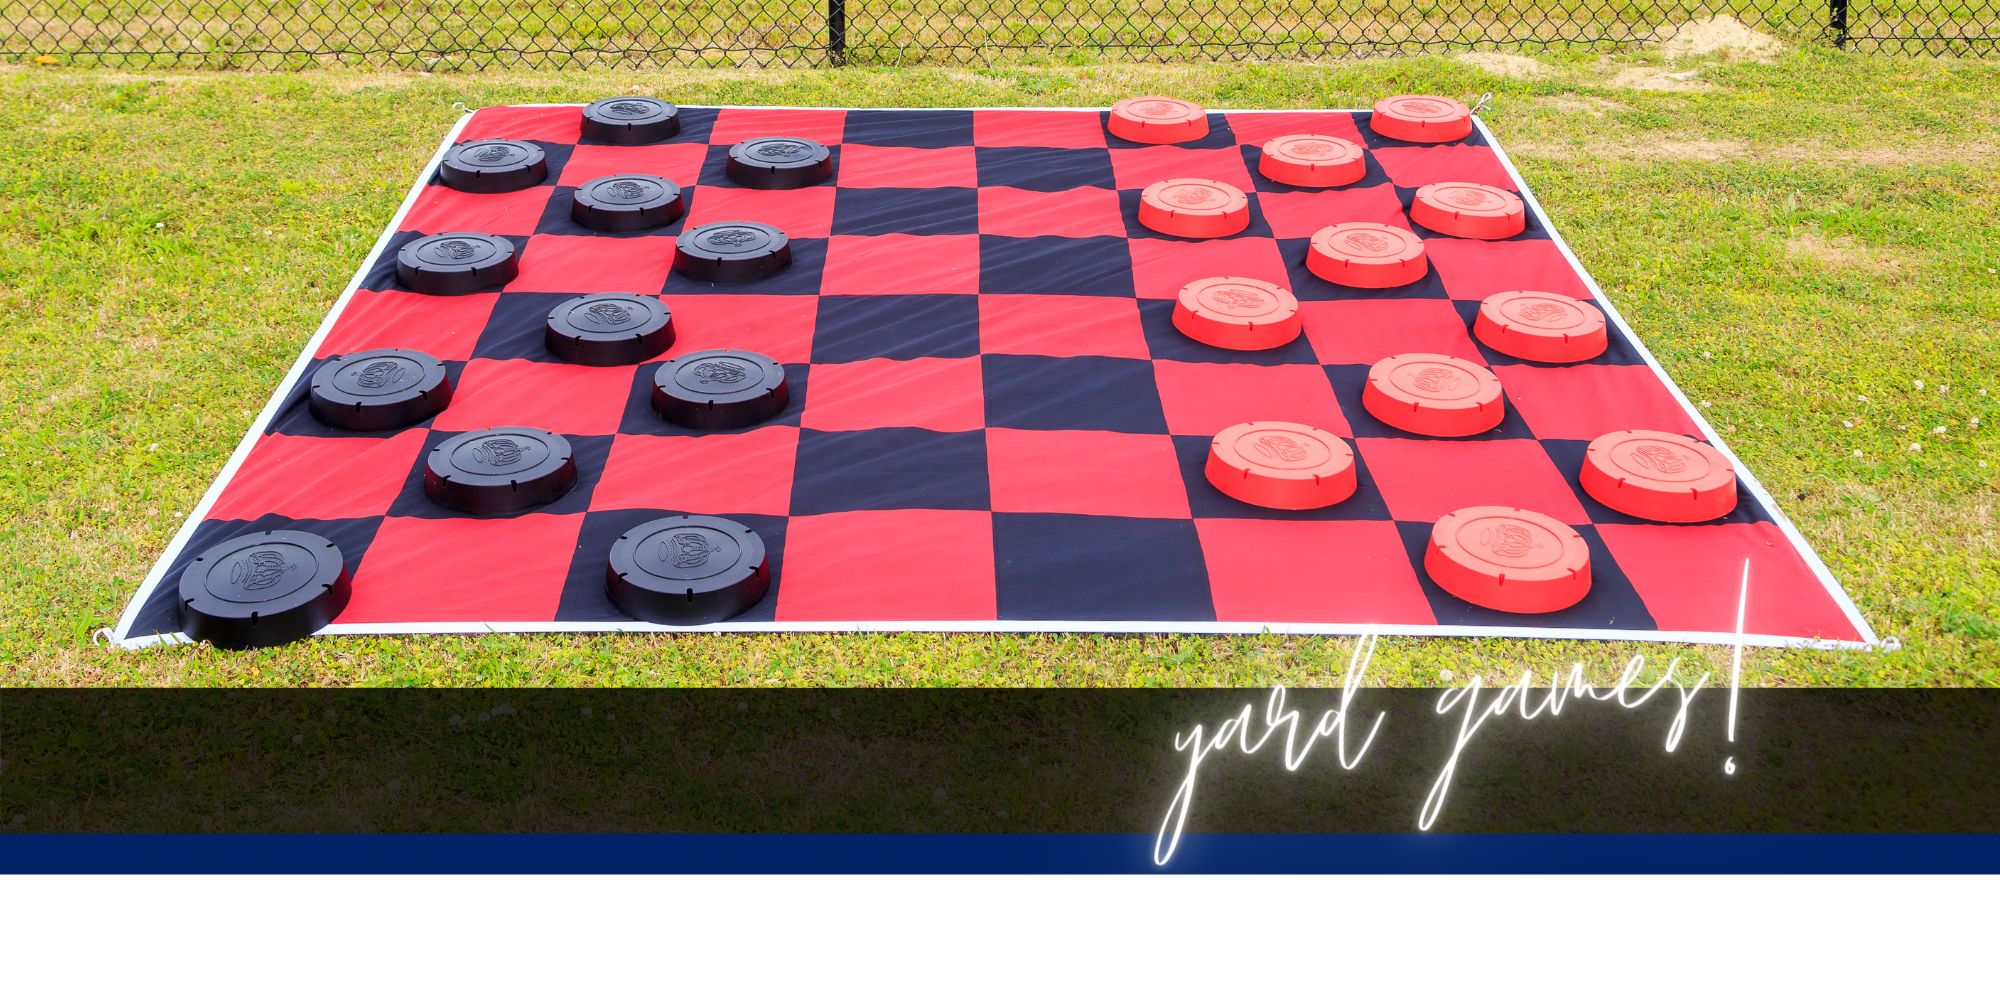 oversized outdoor checkers